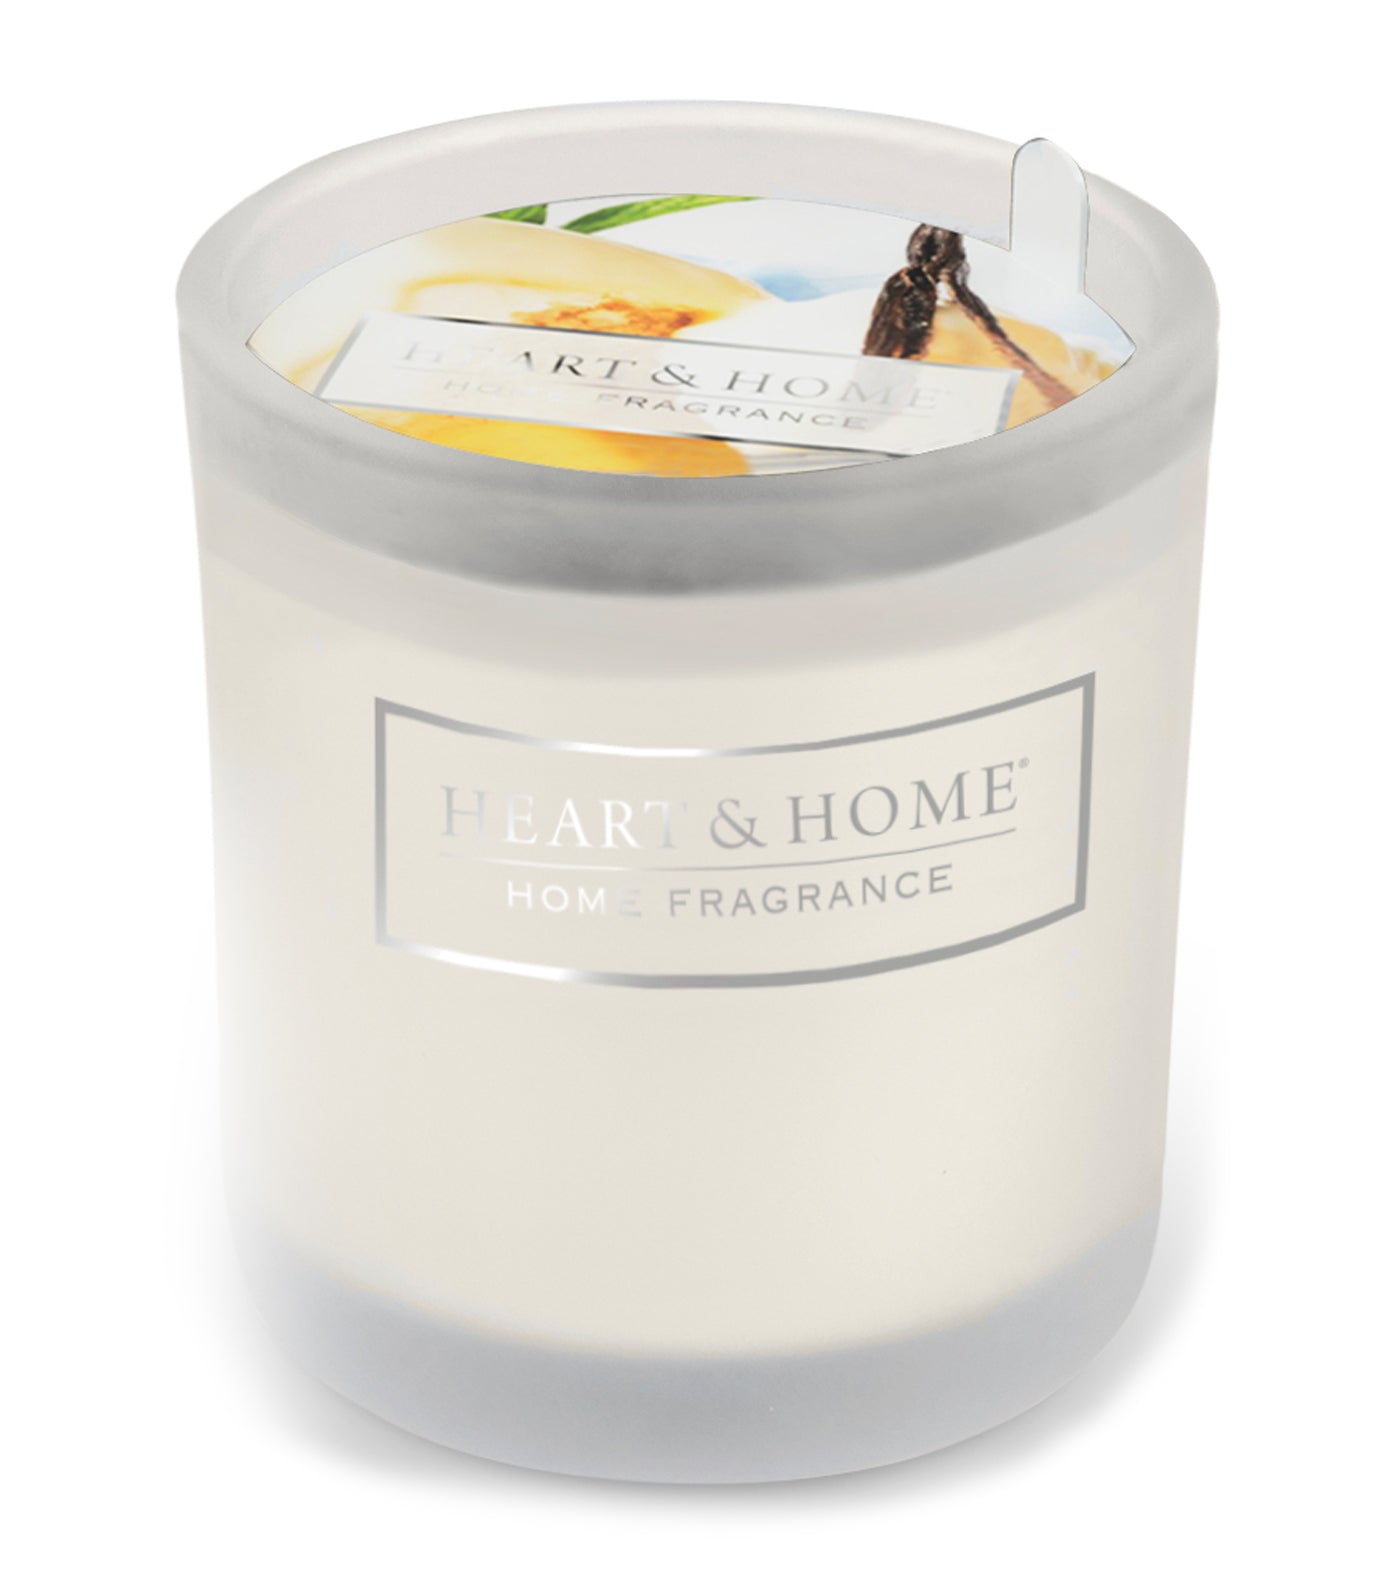 heart & home french vanilla - glass votive soy candle